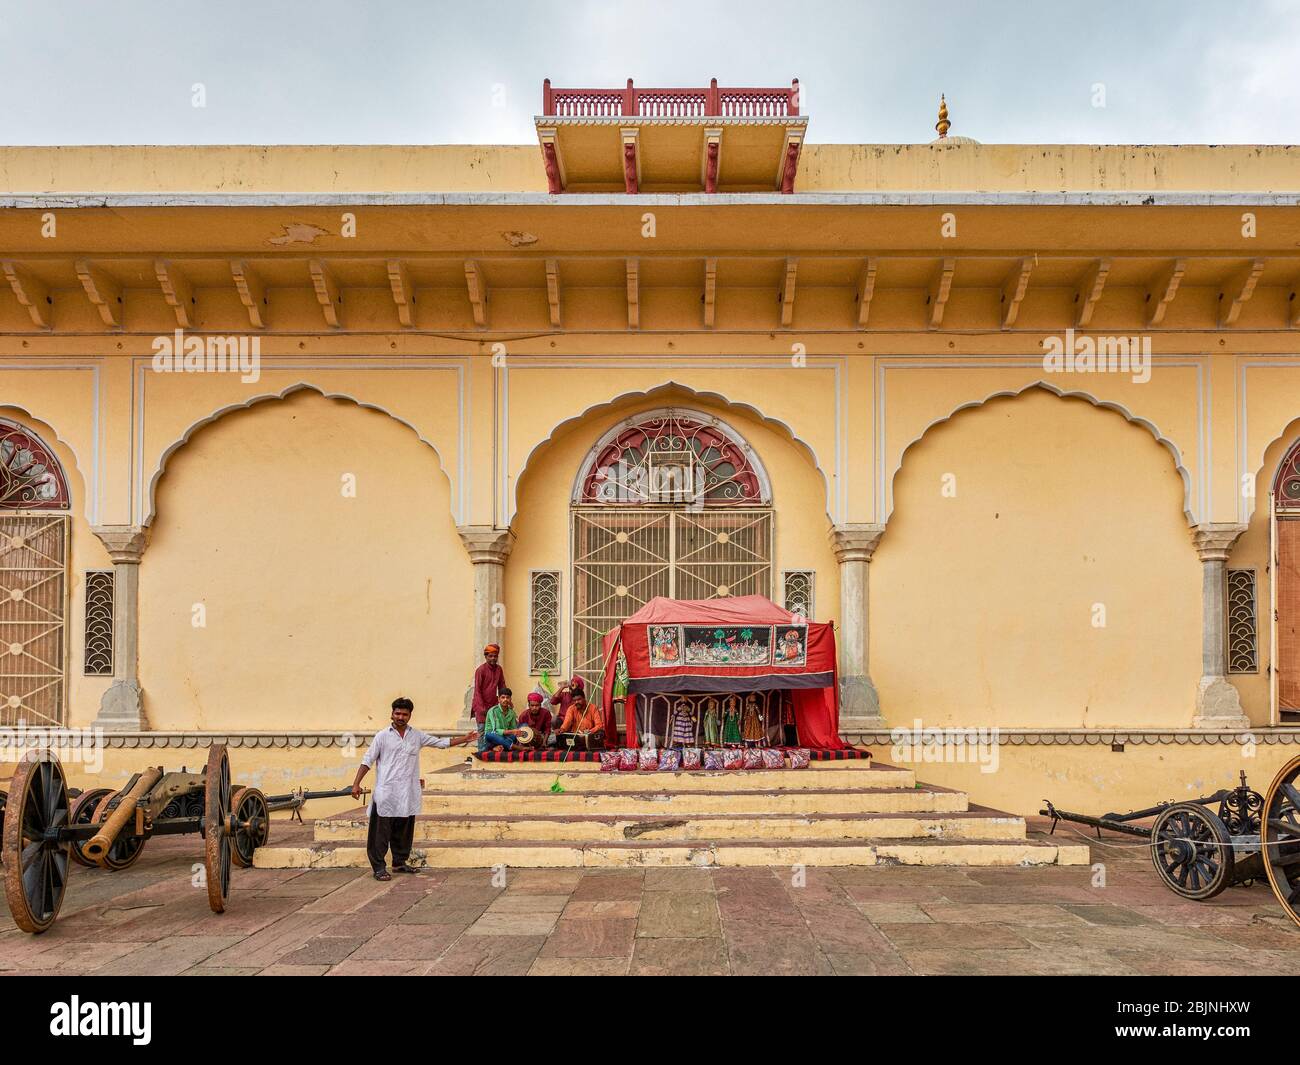 Jaipur, Rajasthan / India - September 29, 2019: Performers of traditional Rajasthani doll dance puppet show (Kathputli dance) in Jaipur, Rajasthan, In Stock Photo